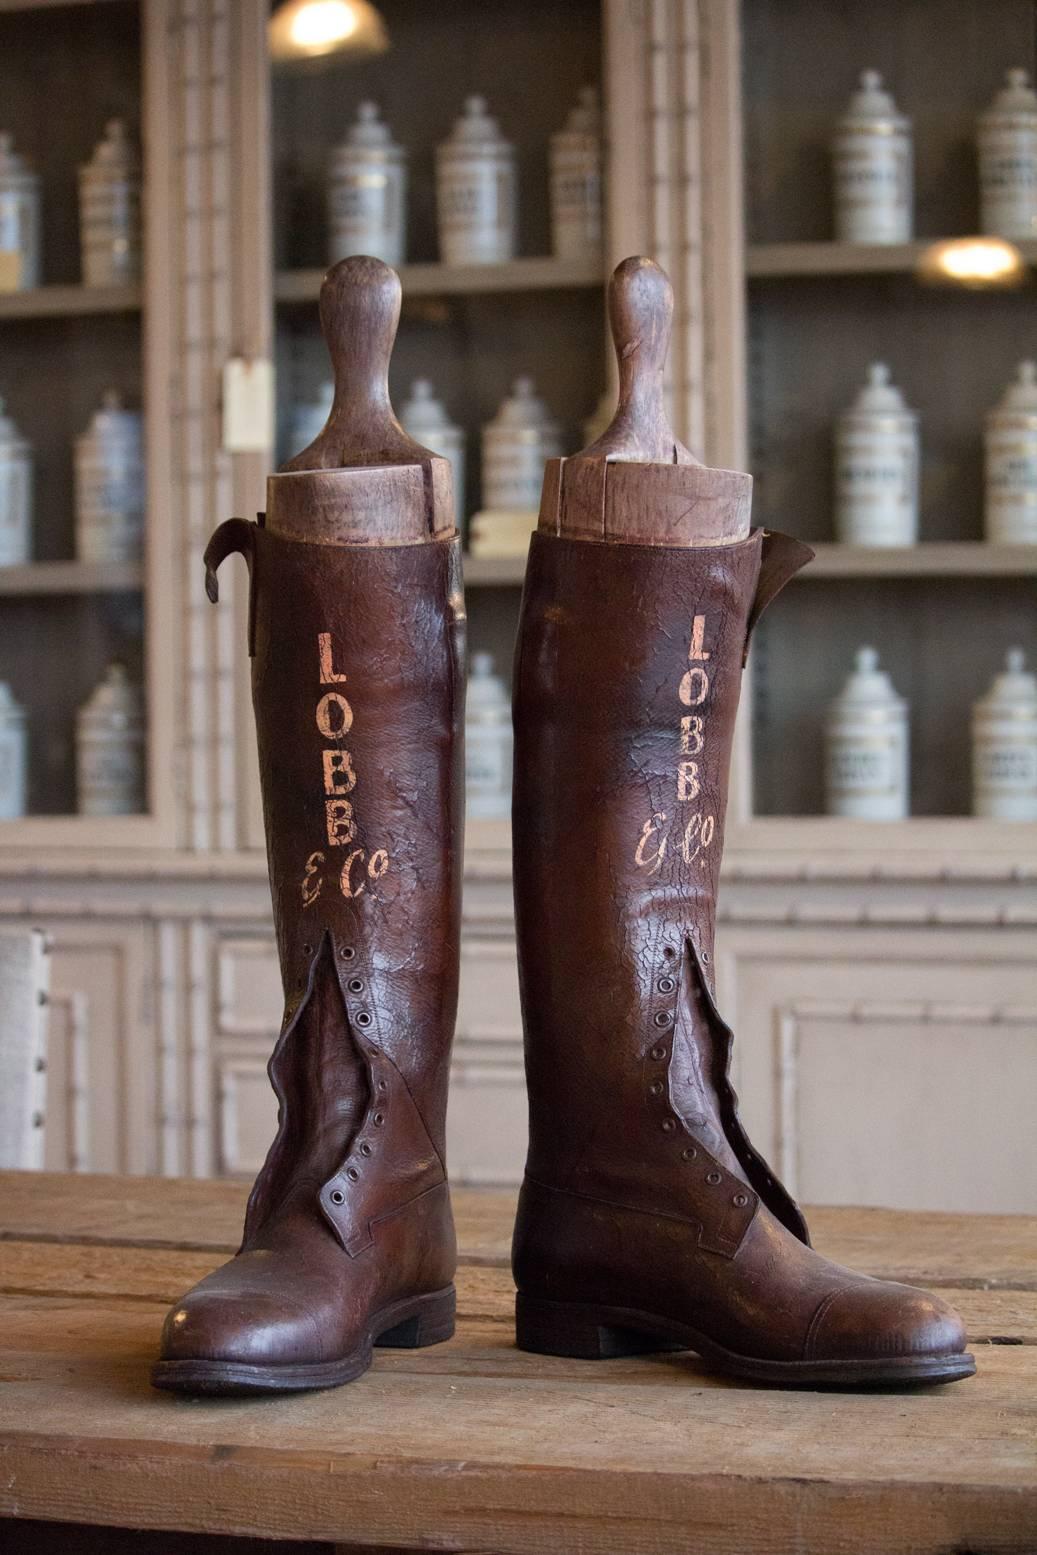 Pair of late 1800s men's leather riding boots made by Lobb & Co. of London, used for advertising with gilt lettering.

Everyone from King Edward VII to Frank Sinatra have owned Lobbs. They have two royal warrants, for his royal highness, the